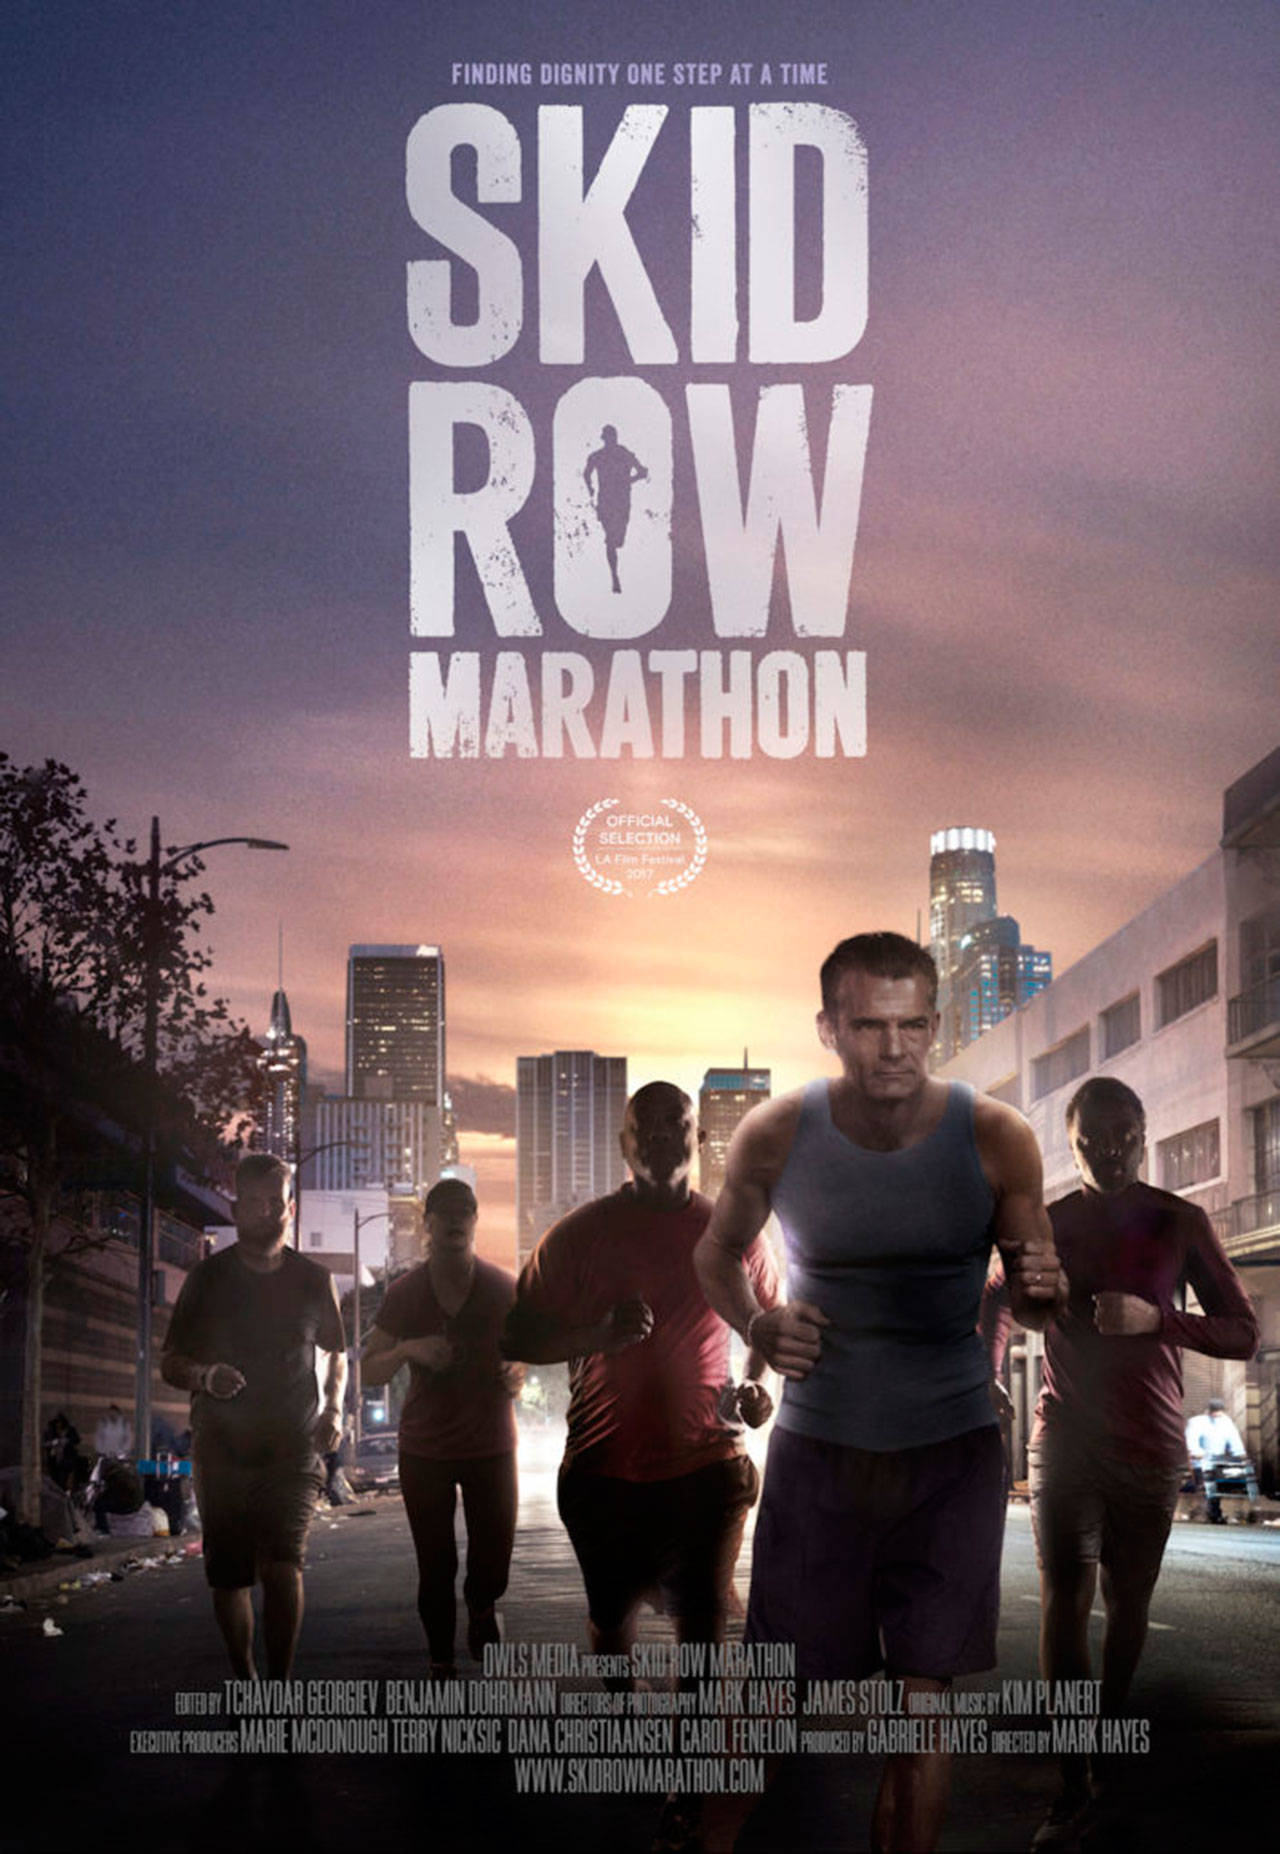 Image courtesy of the Bainbridge Island Museum of Art | “Skid Row Marathon,” one of the films featured in the ongoing smARTfilm series at the Bainbridge Island Museum of Art.